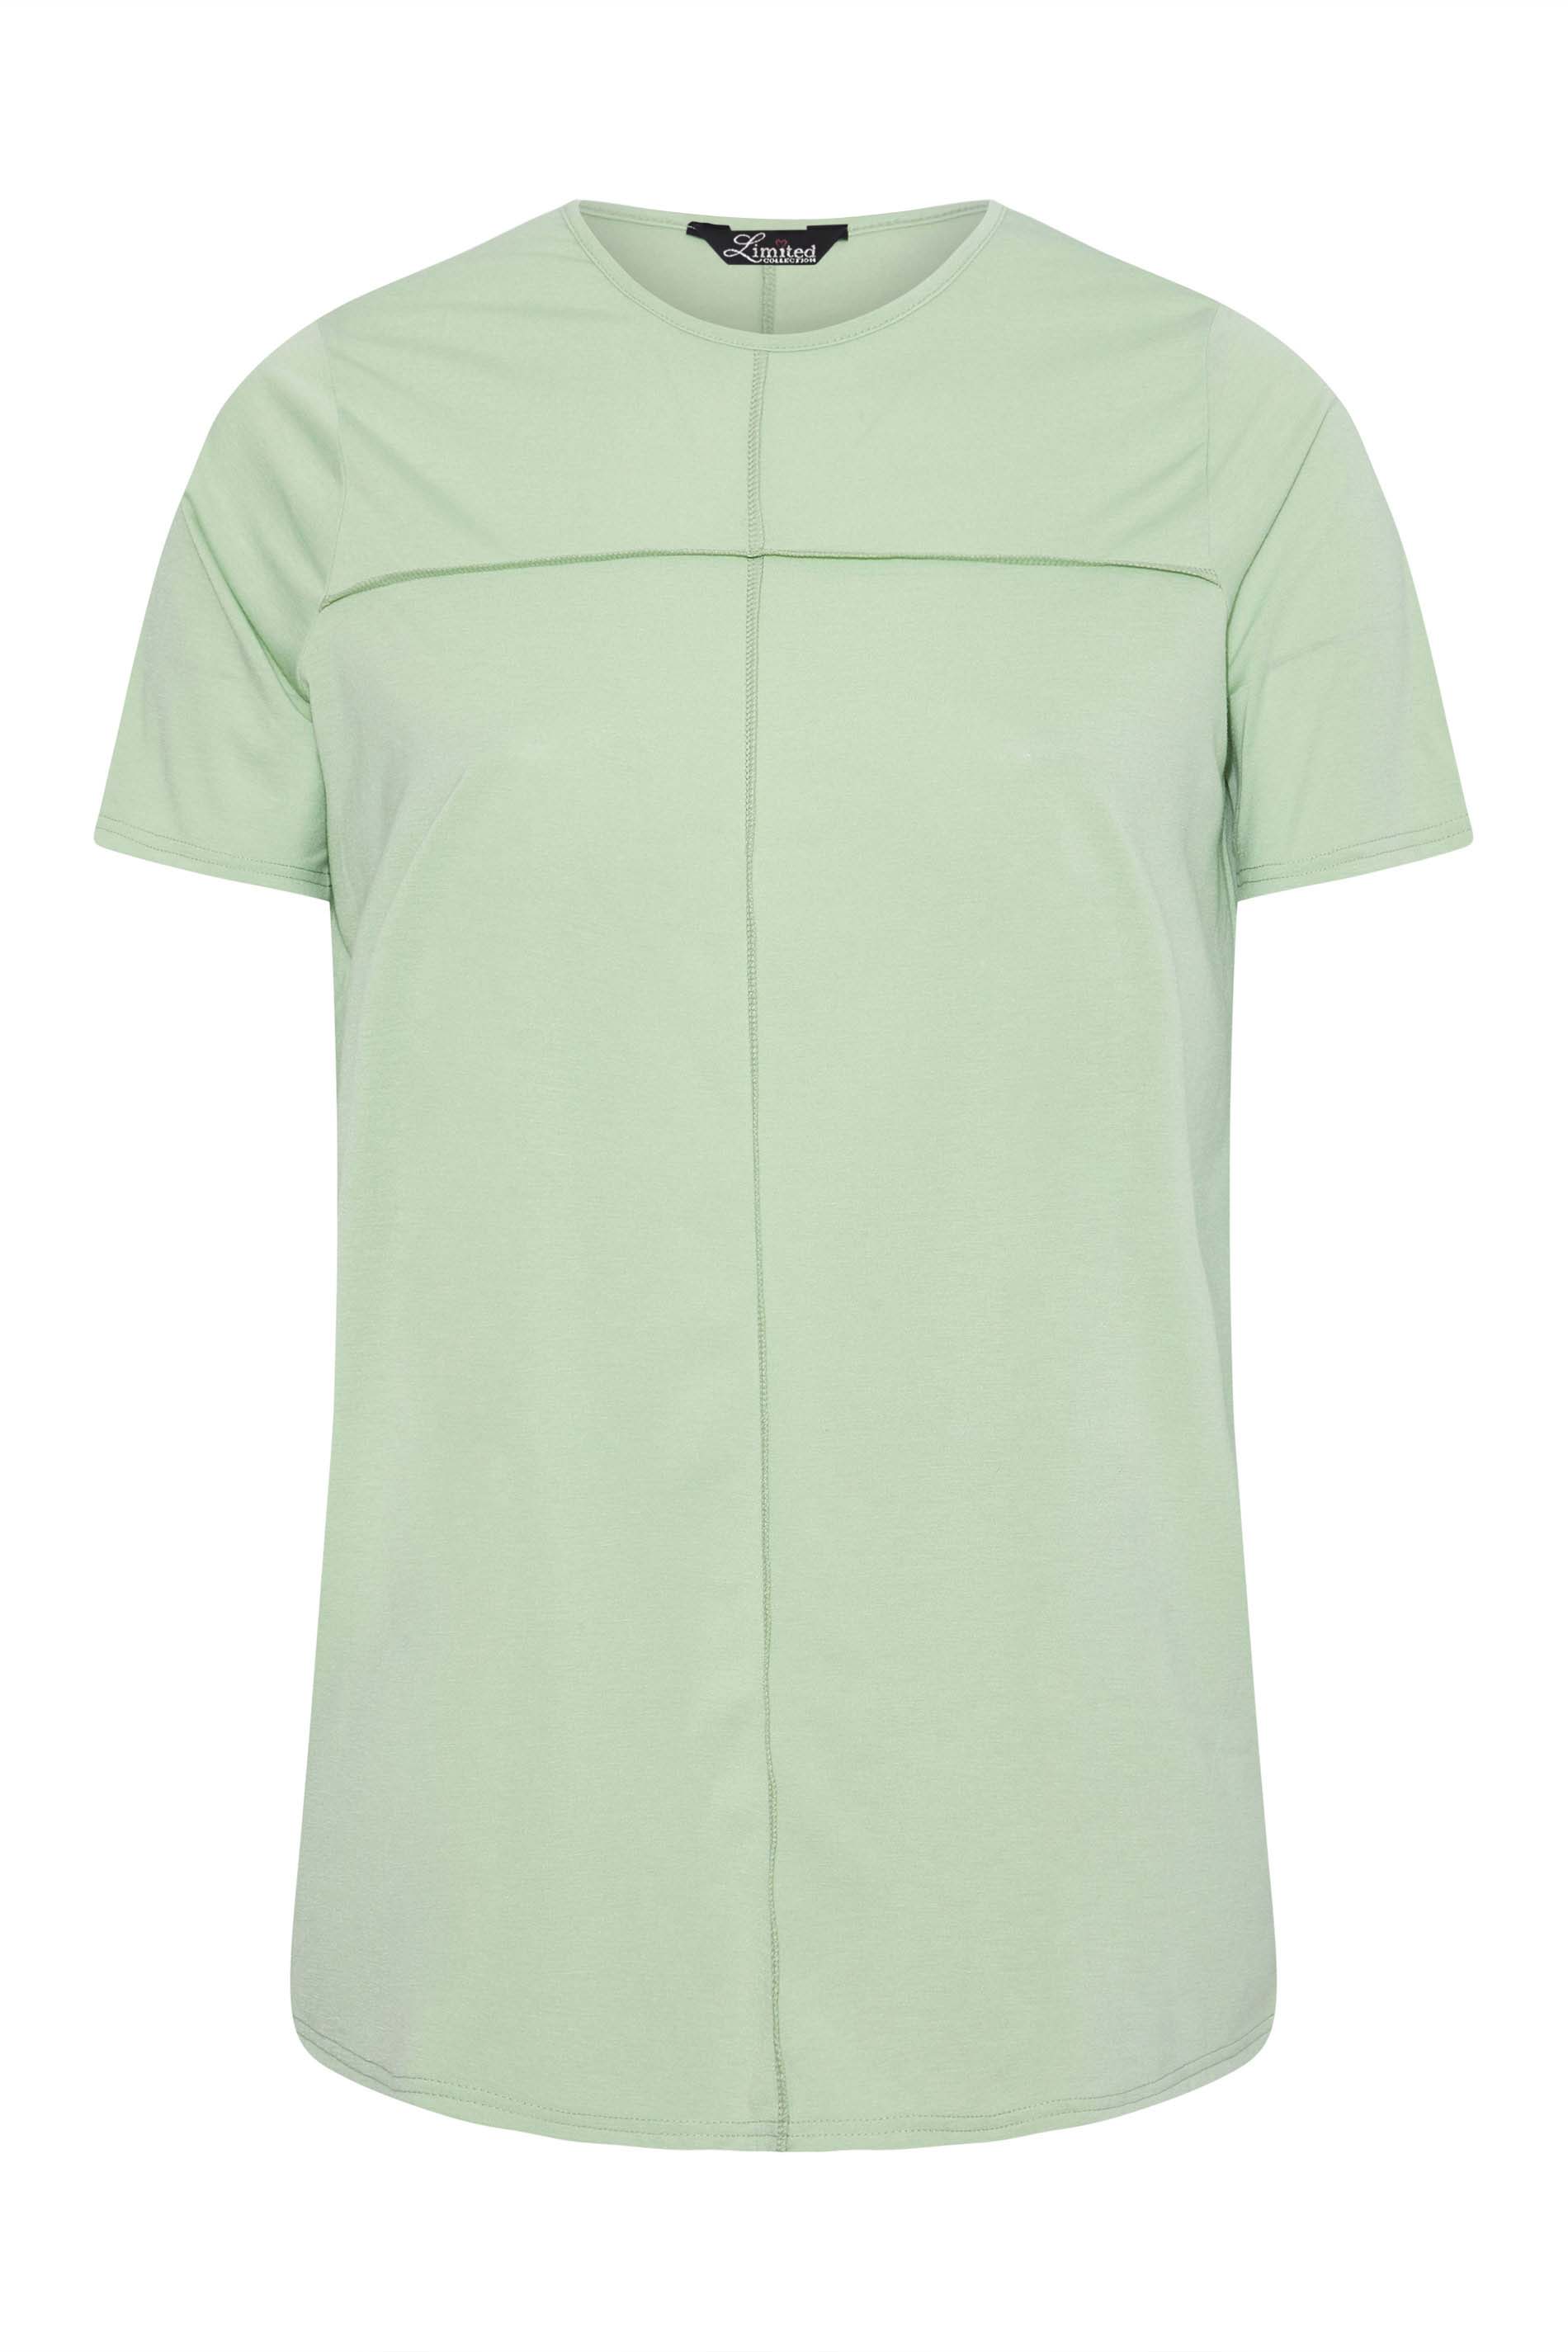 Grande taille  Tops Grande taille  T-Shirts | LIMITED COLLECTION - T-Shirt Vert Pastel Couture en Jersey - RK62290